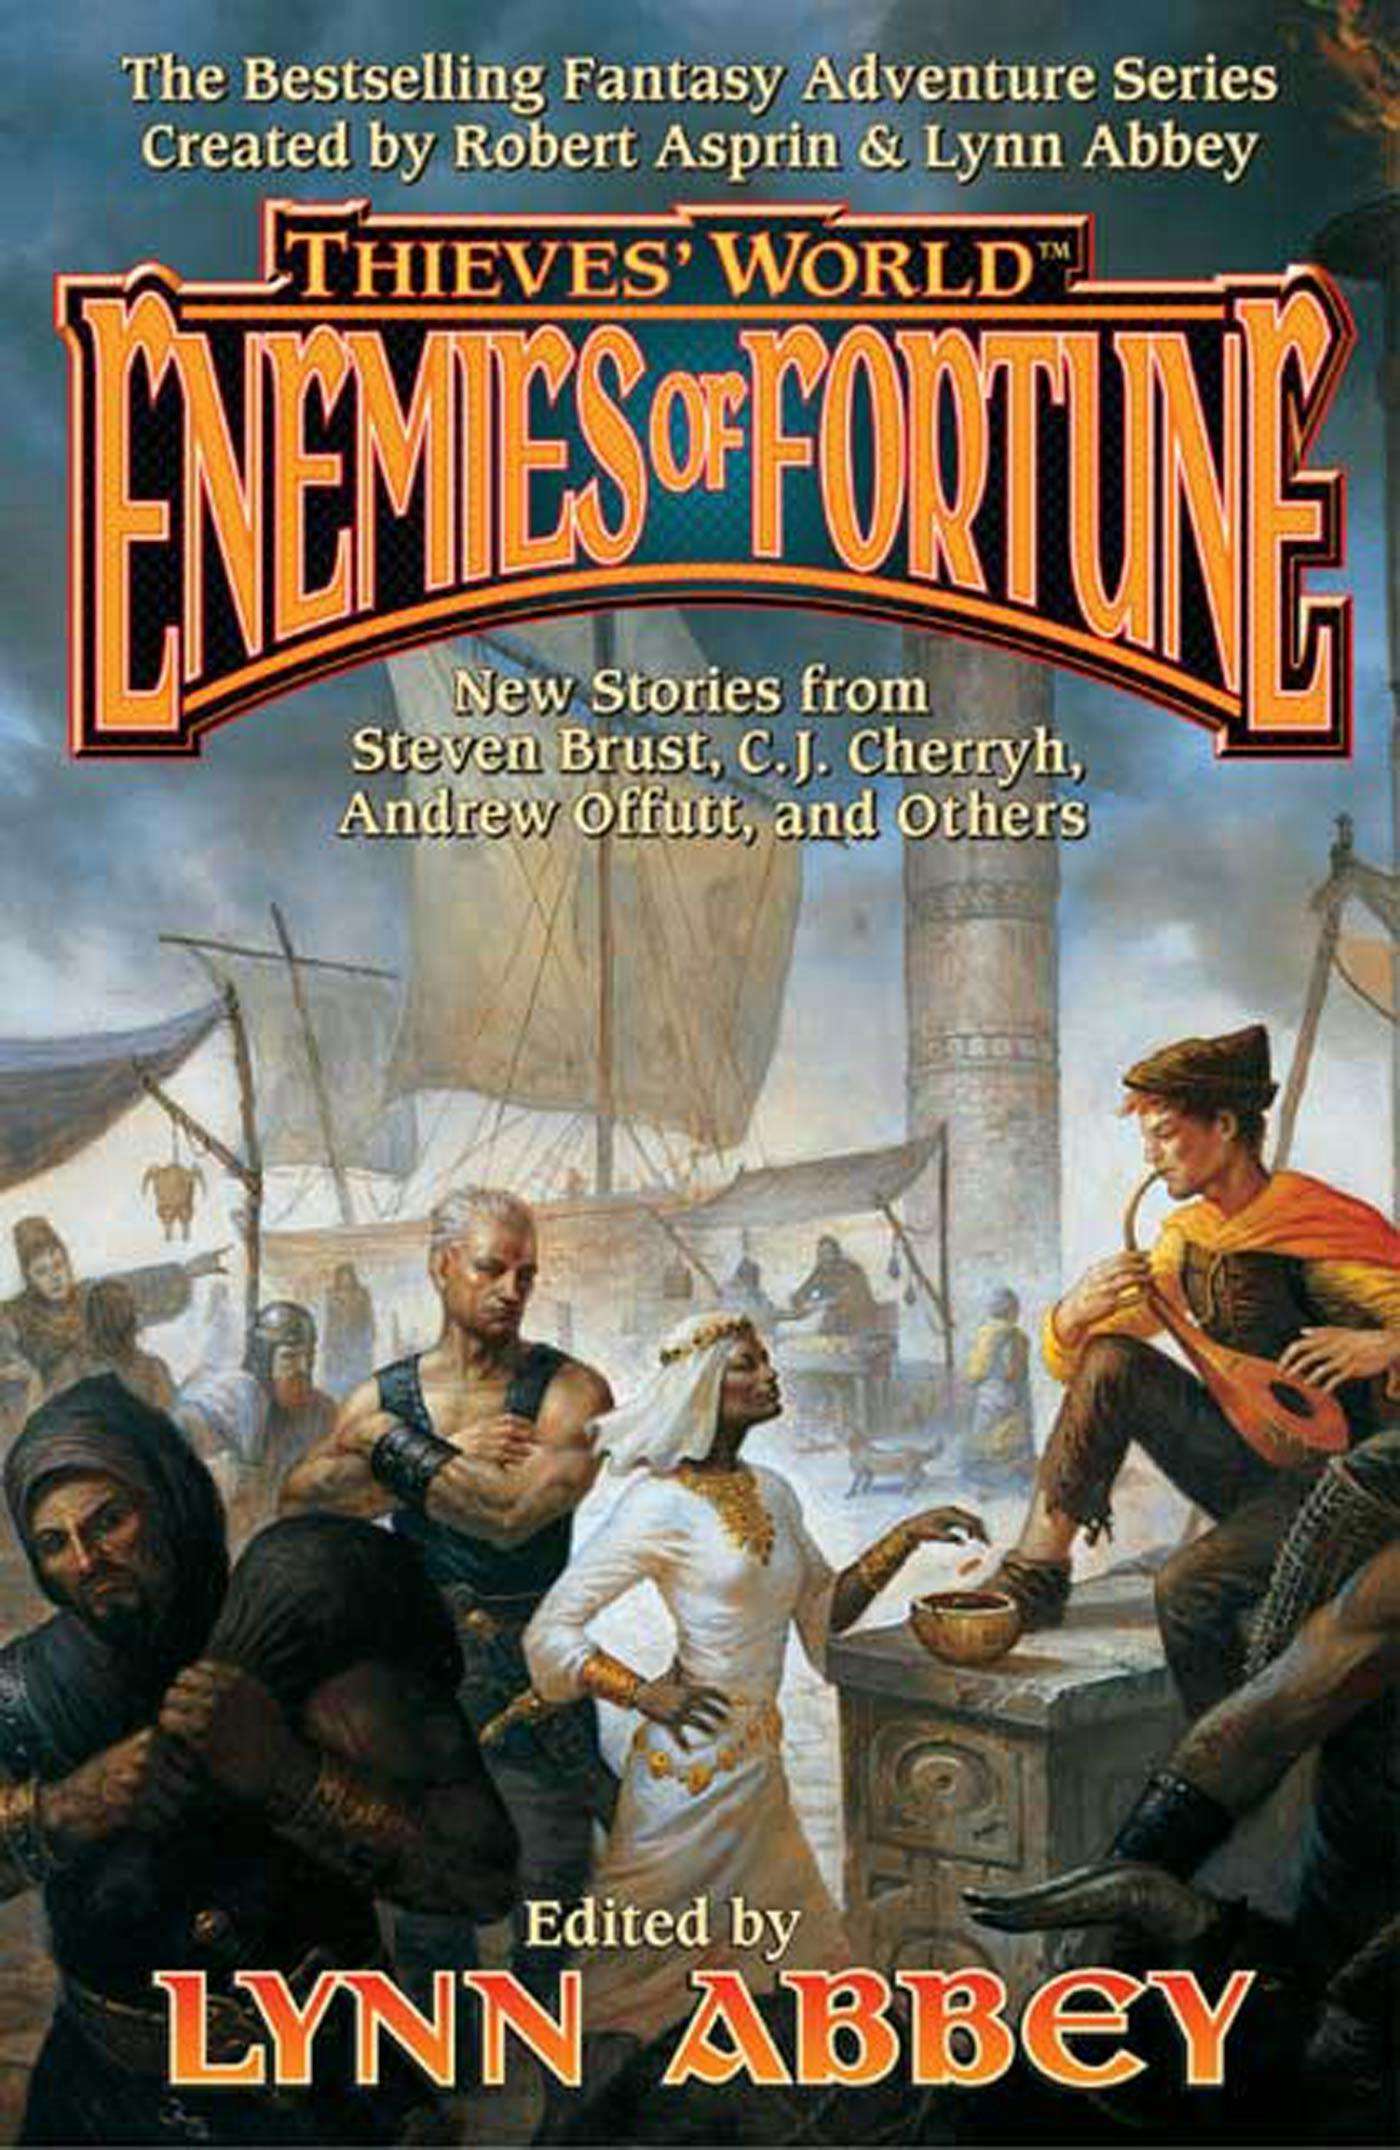 Cover for the book titled as: Thieves' World: Enemies of Fortune